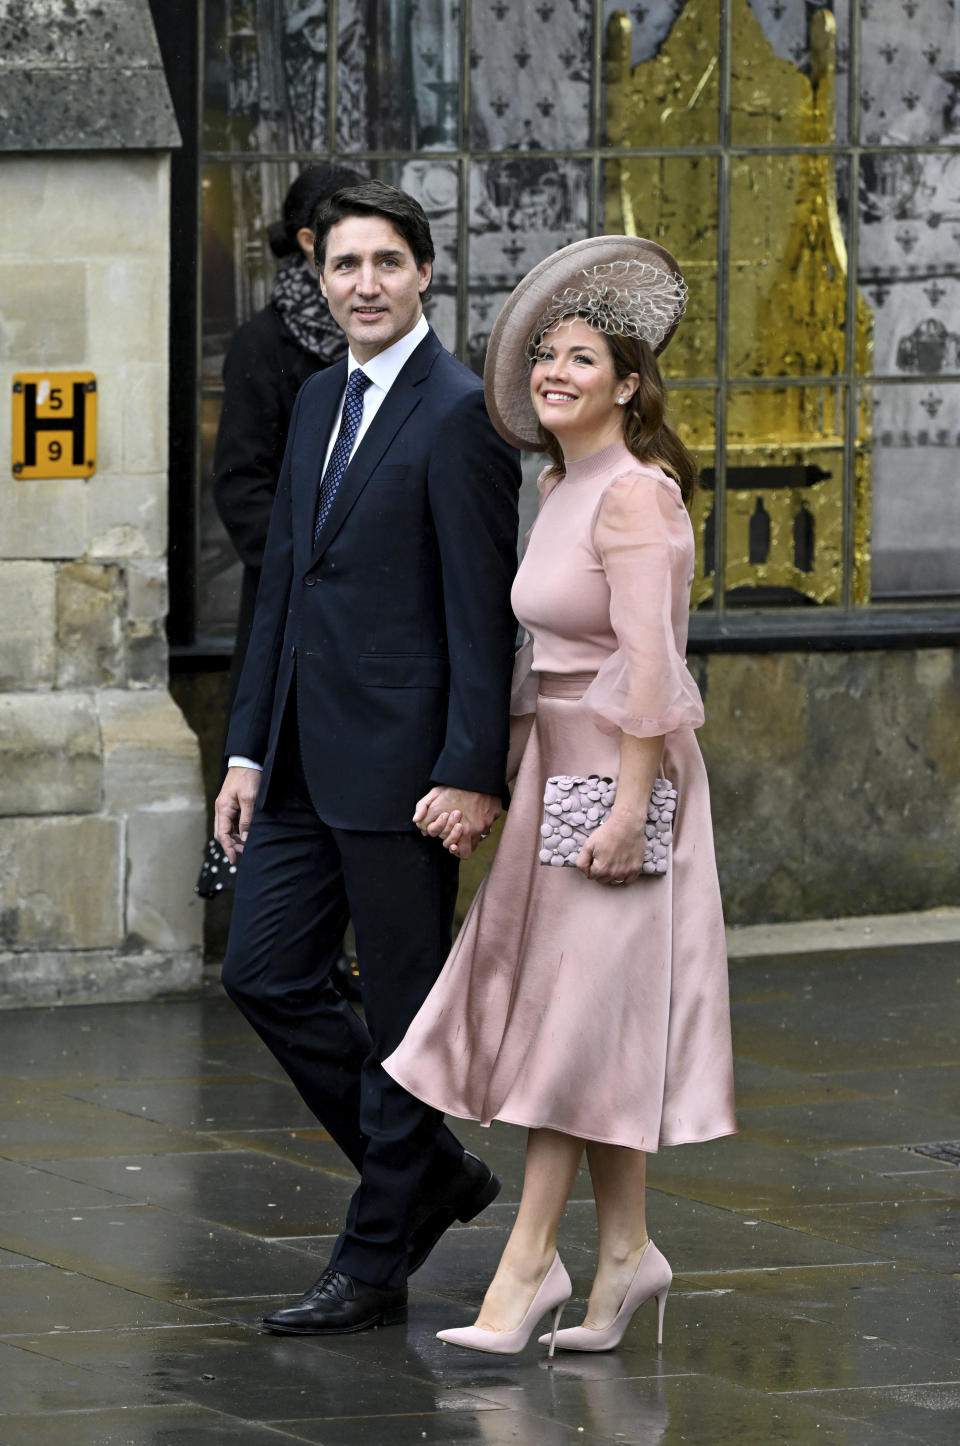 Canadian Prime minister Justin Trudeau and wife Sophie Grégoire Trudeau arrive to attend Britain's King Charles III and Camilla, the Queen Consort, coronation ceremony at Westminster Abbey, London, Saturday, May 6, 2023. (Toby Melville, Pool via AP)